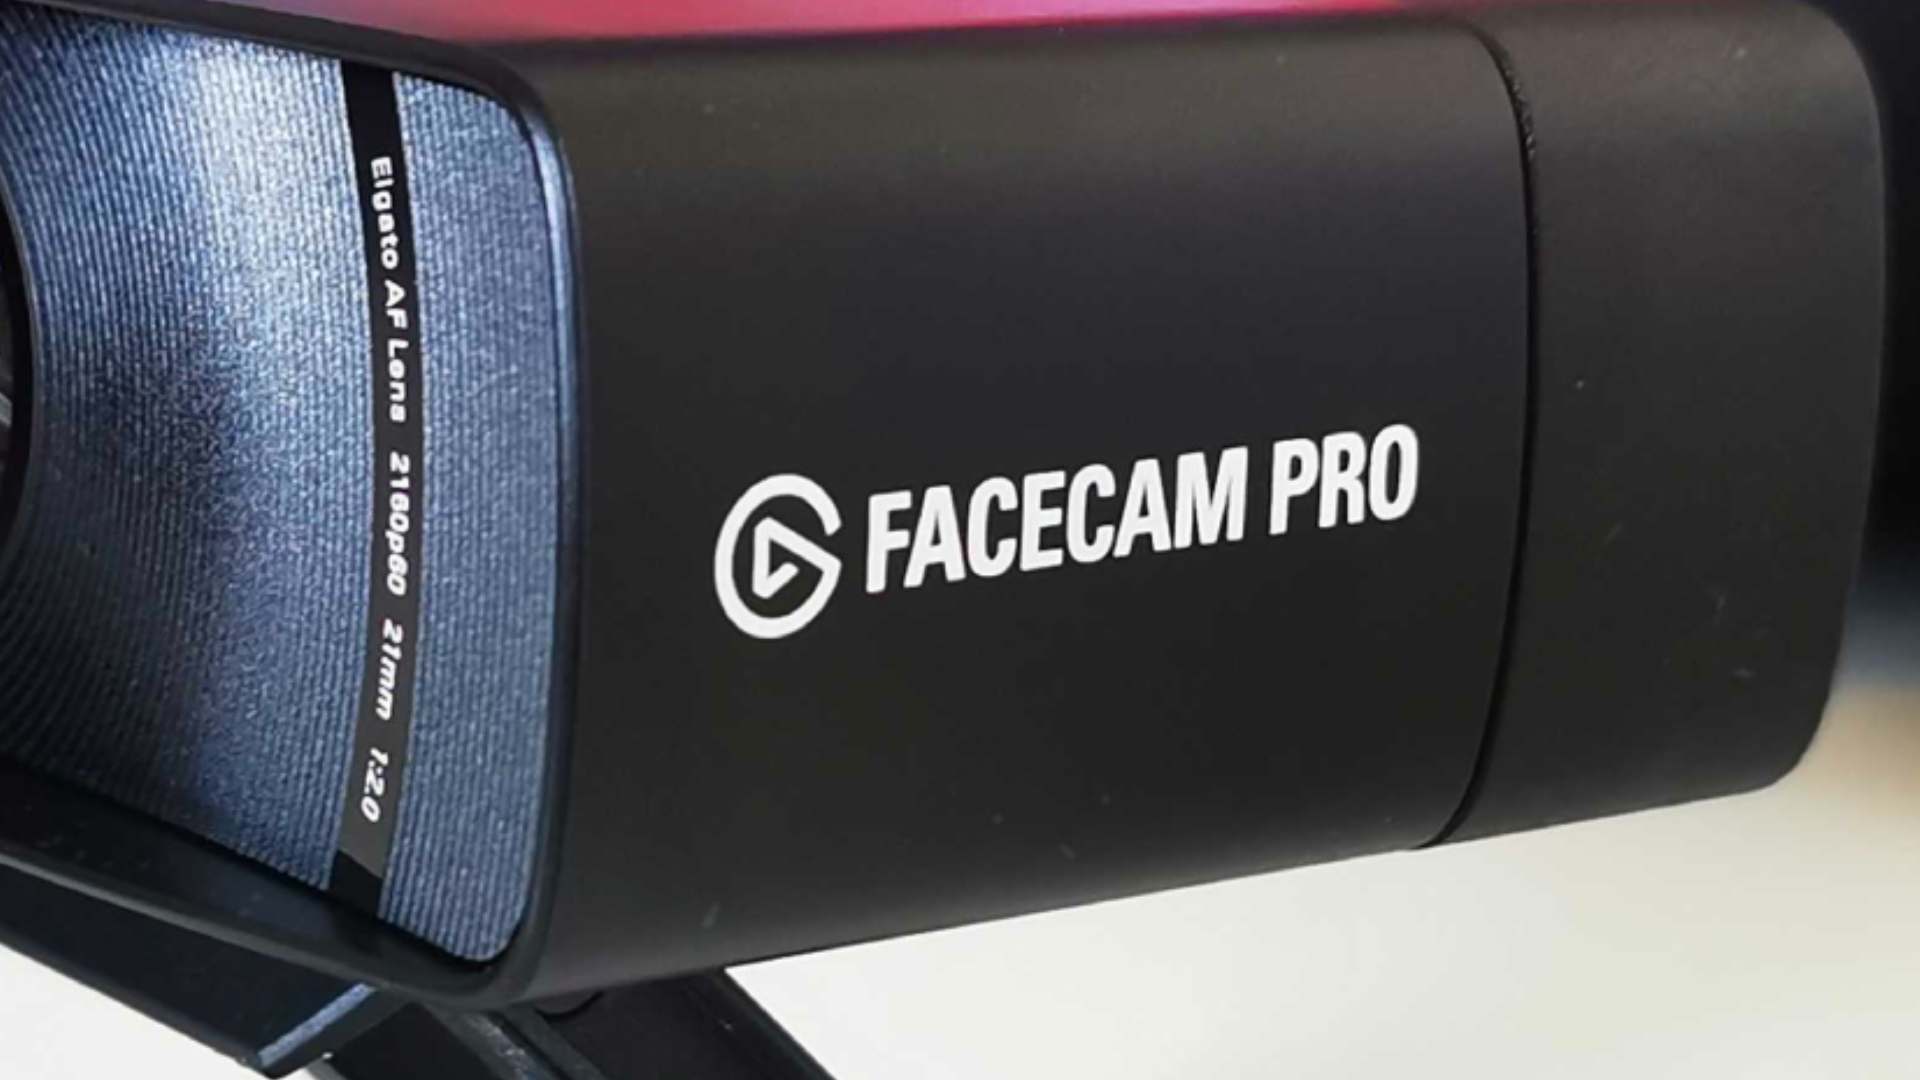 Closeup of Elgato Facecam Pro logo on text on side of webcam